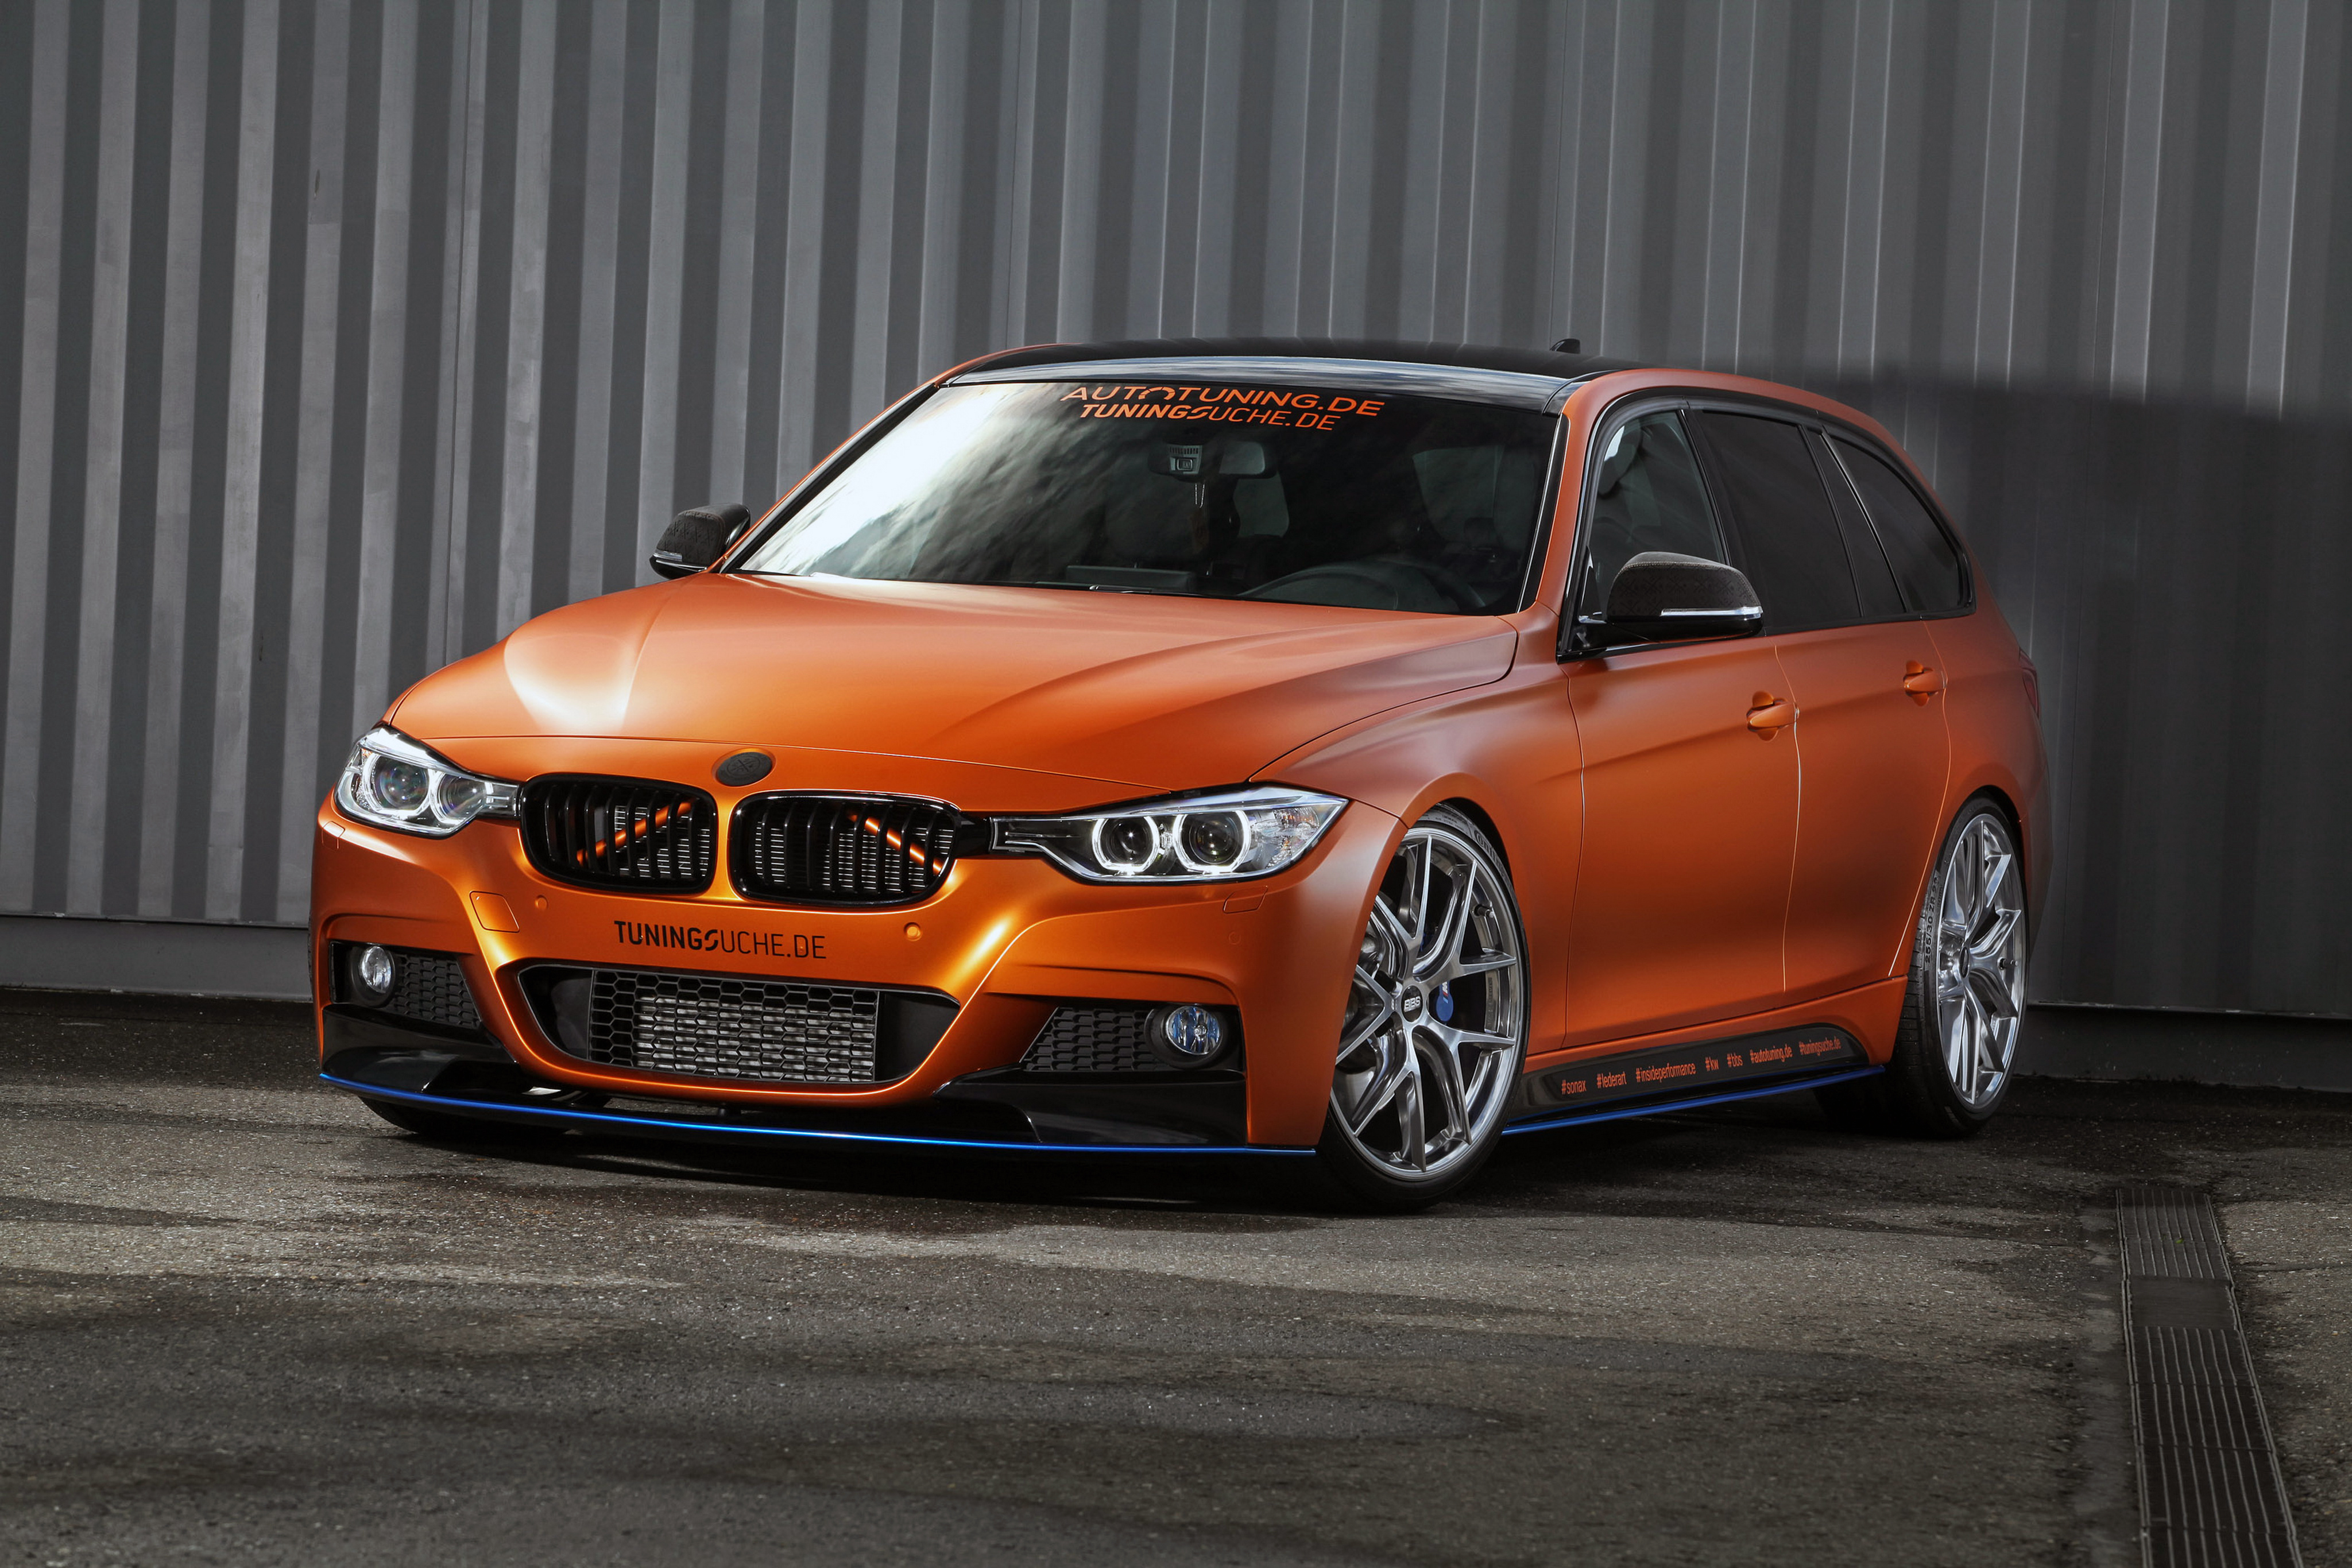 Mobile wallpaper: Bmw, Tuning, Car, Bmw 3 Series, Vehicles, Orange Car, Bmw  3 Series Touring, 757786 download the picture for free.